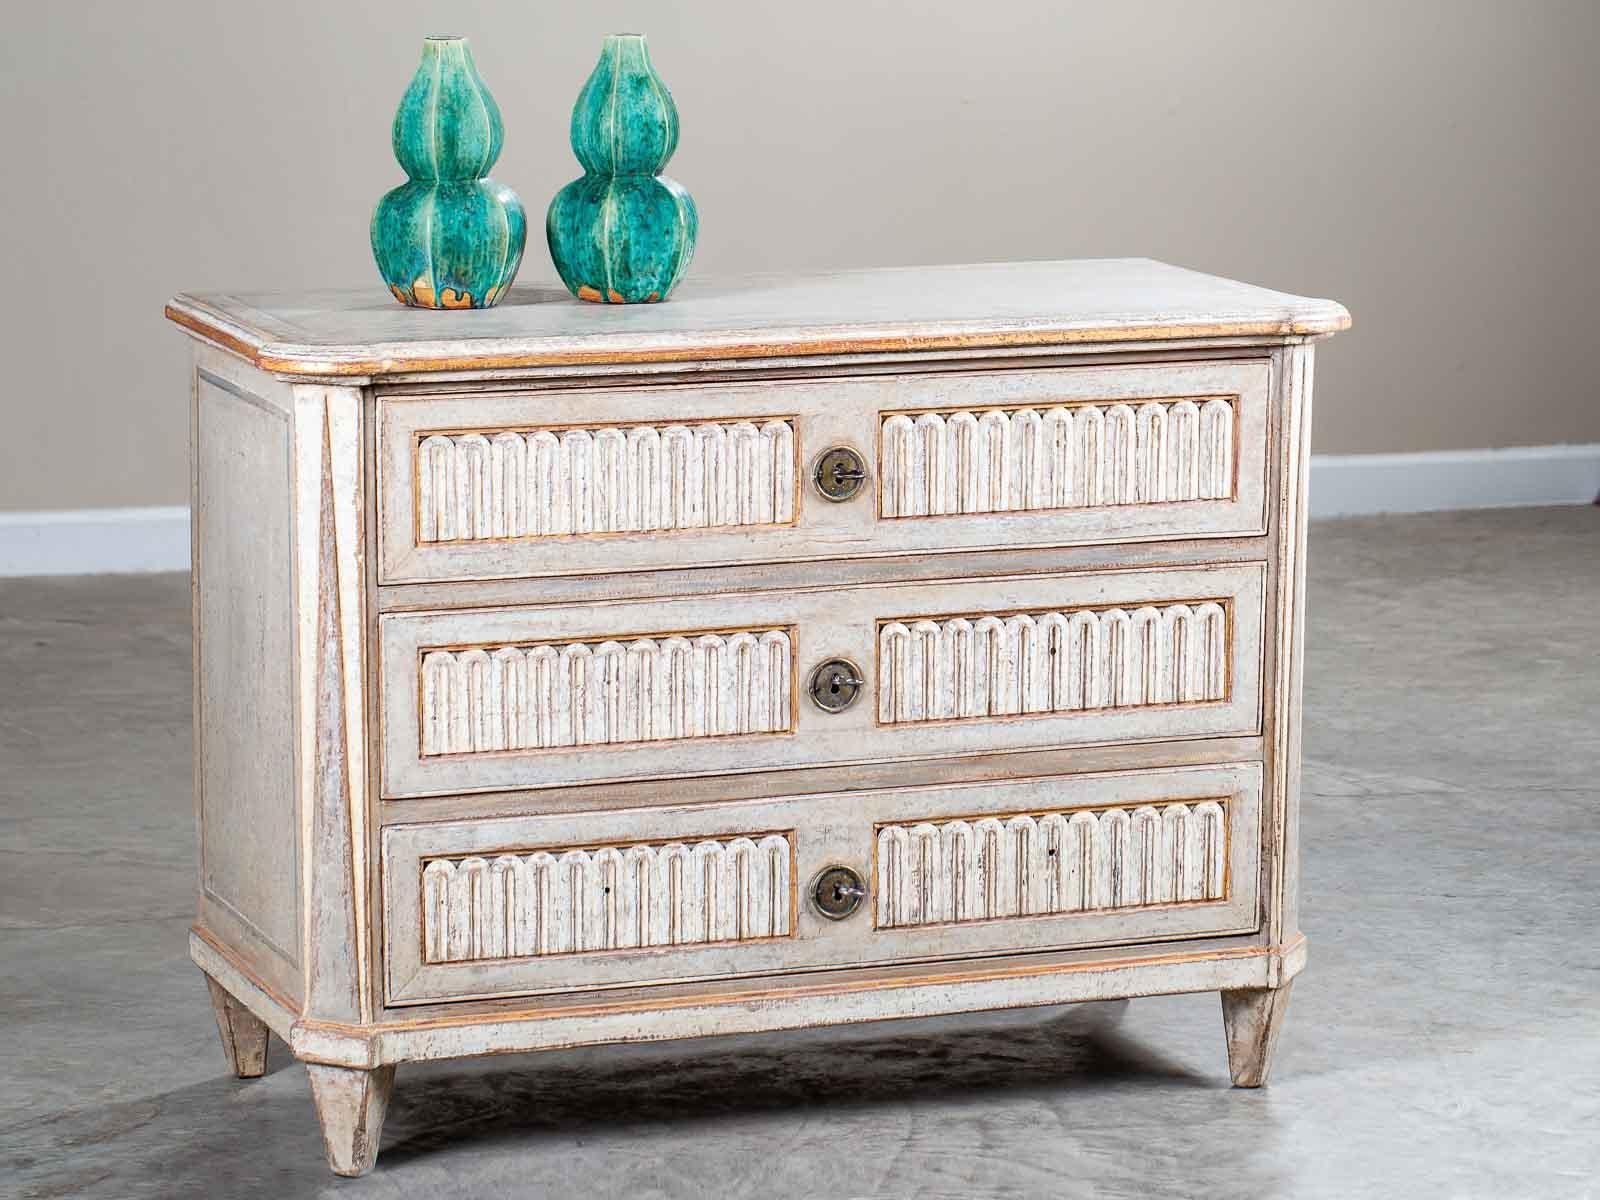 Hand-Carved Antique French Louis XVI Neoclassical Painted Chest of Drawers, circa 1790